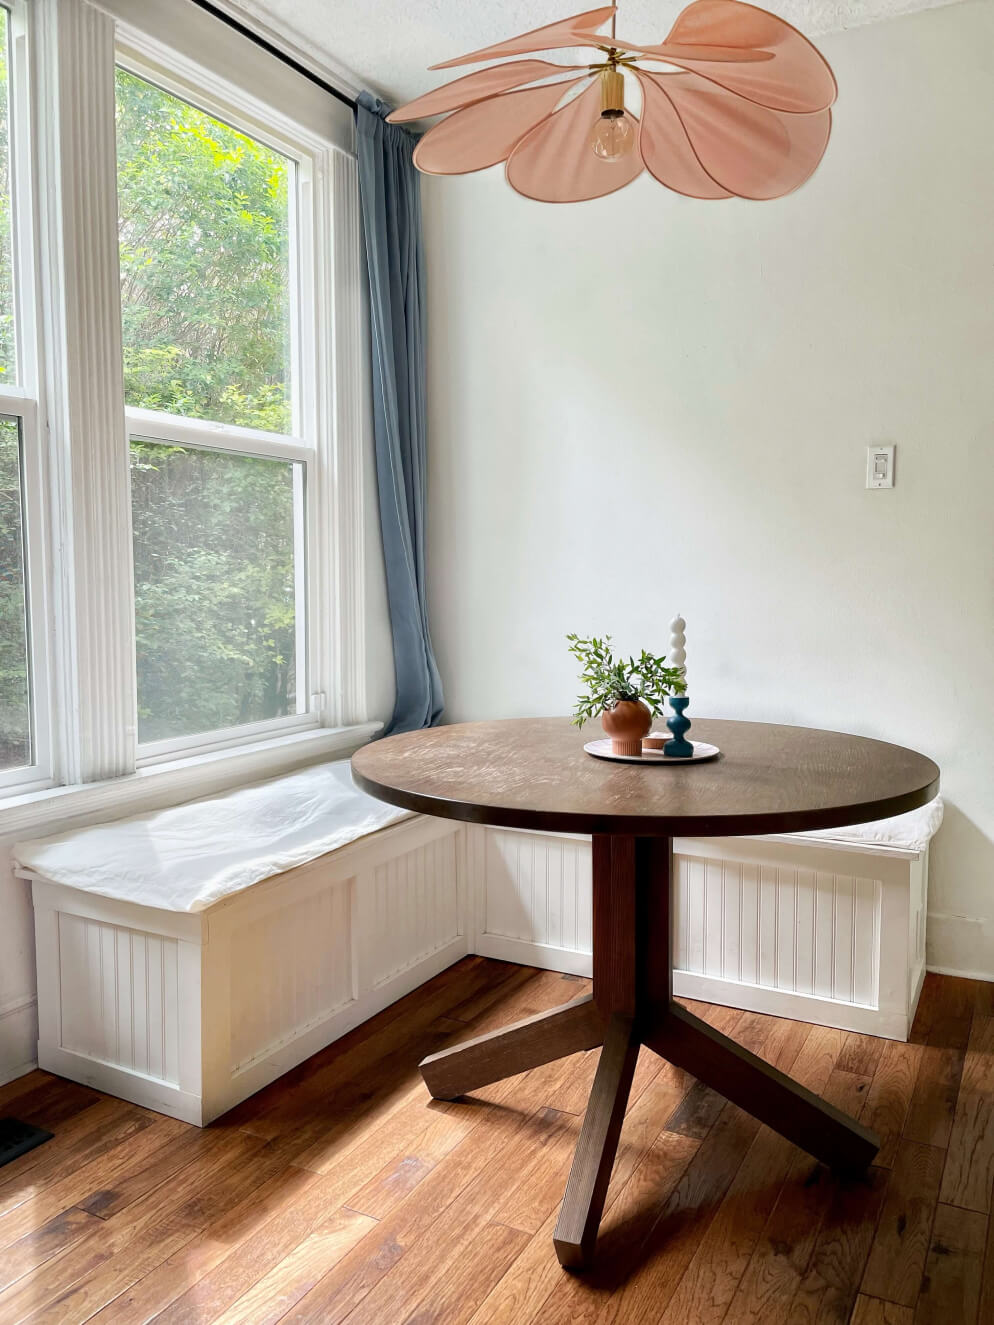 Breakfast nook with pink light and white bench